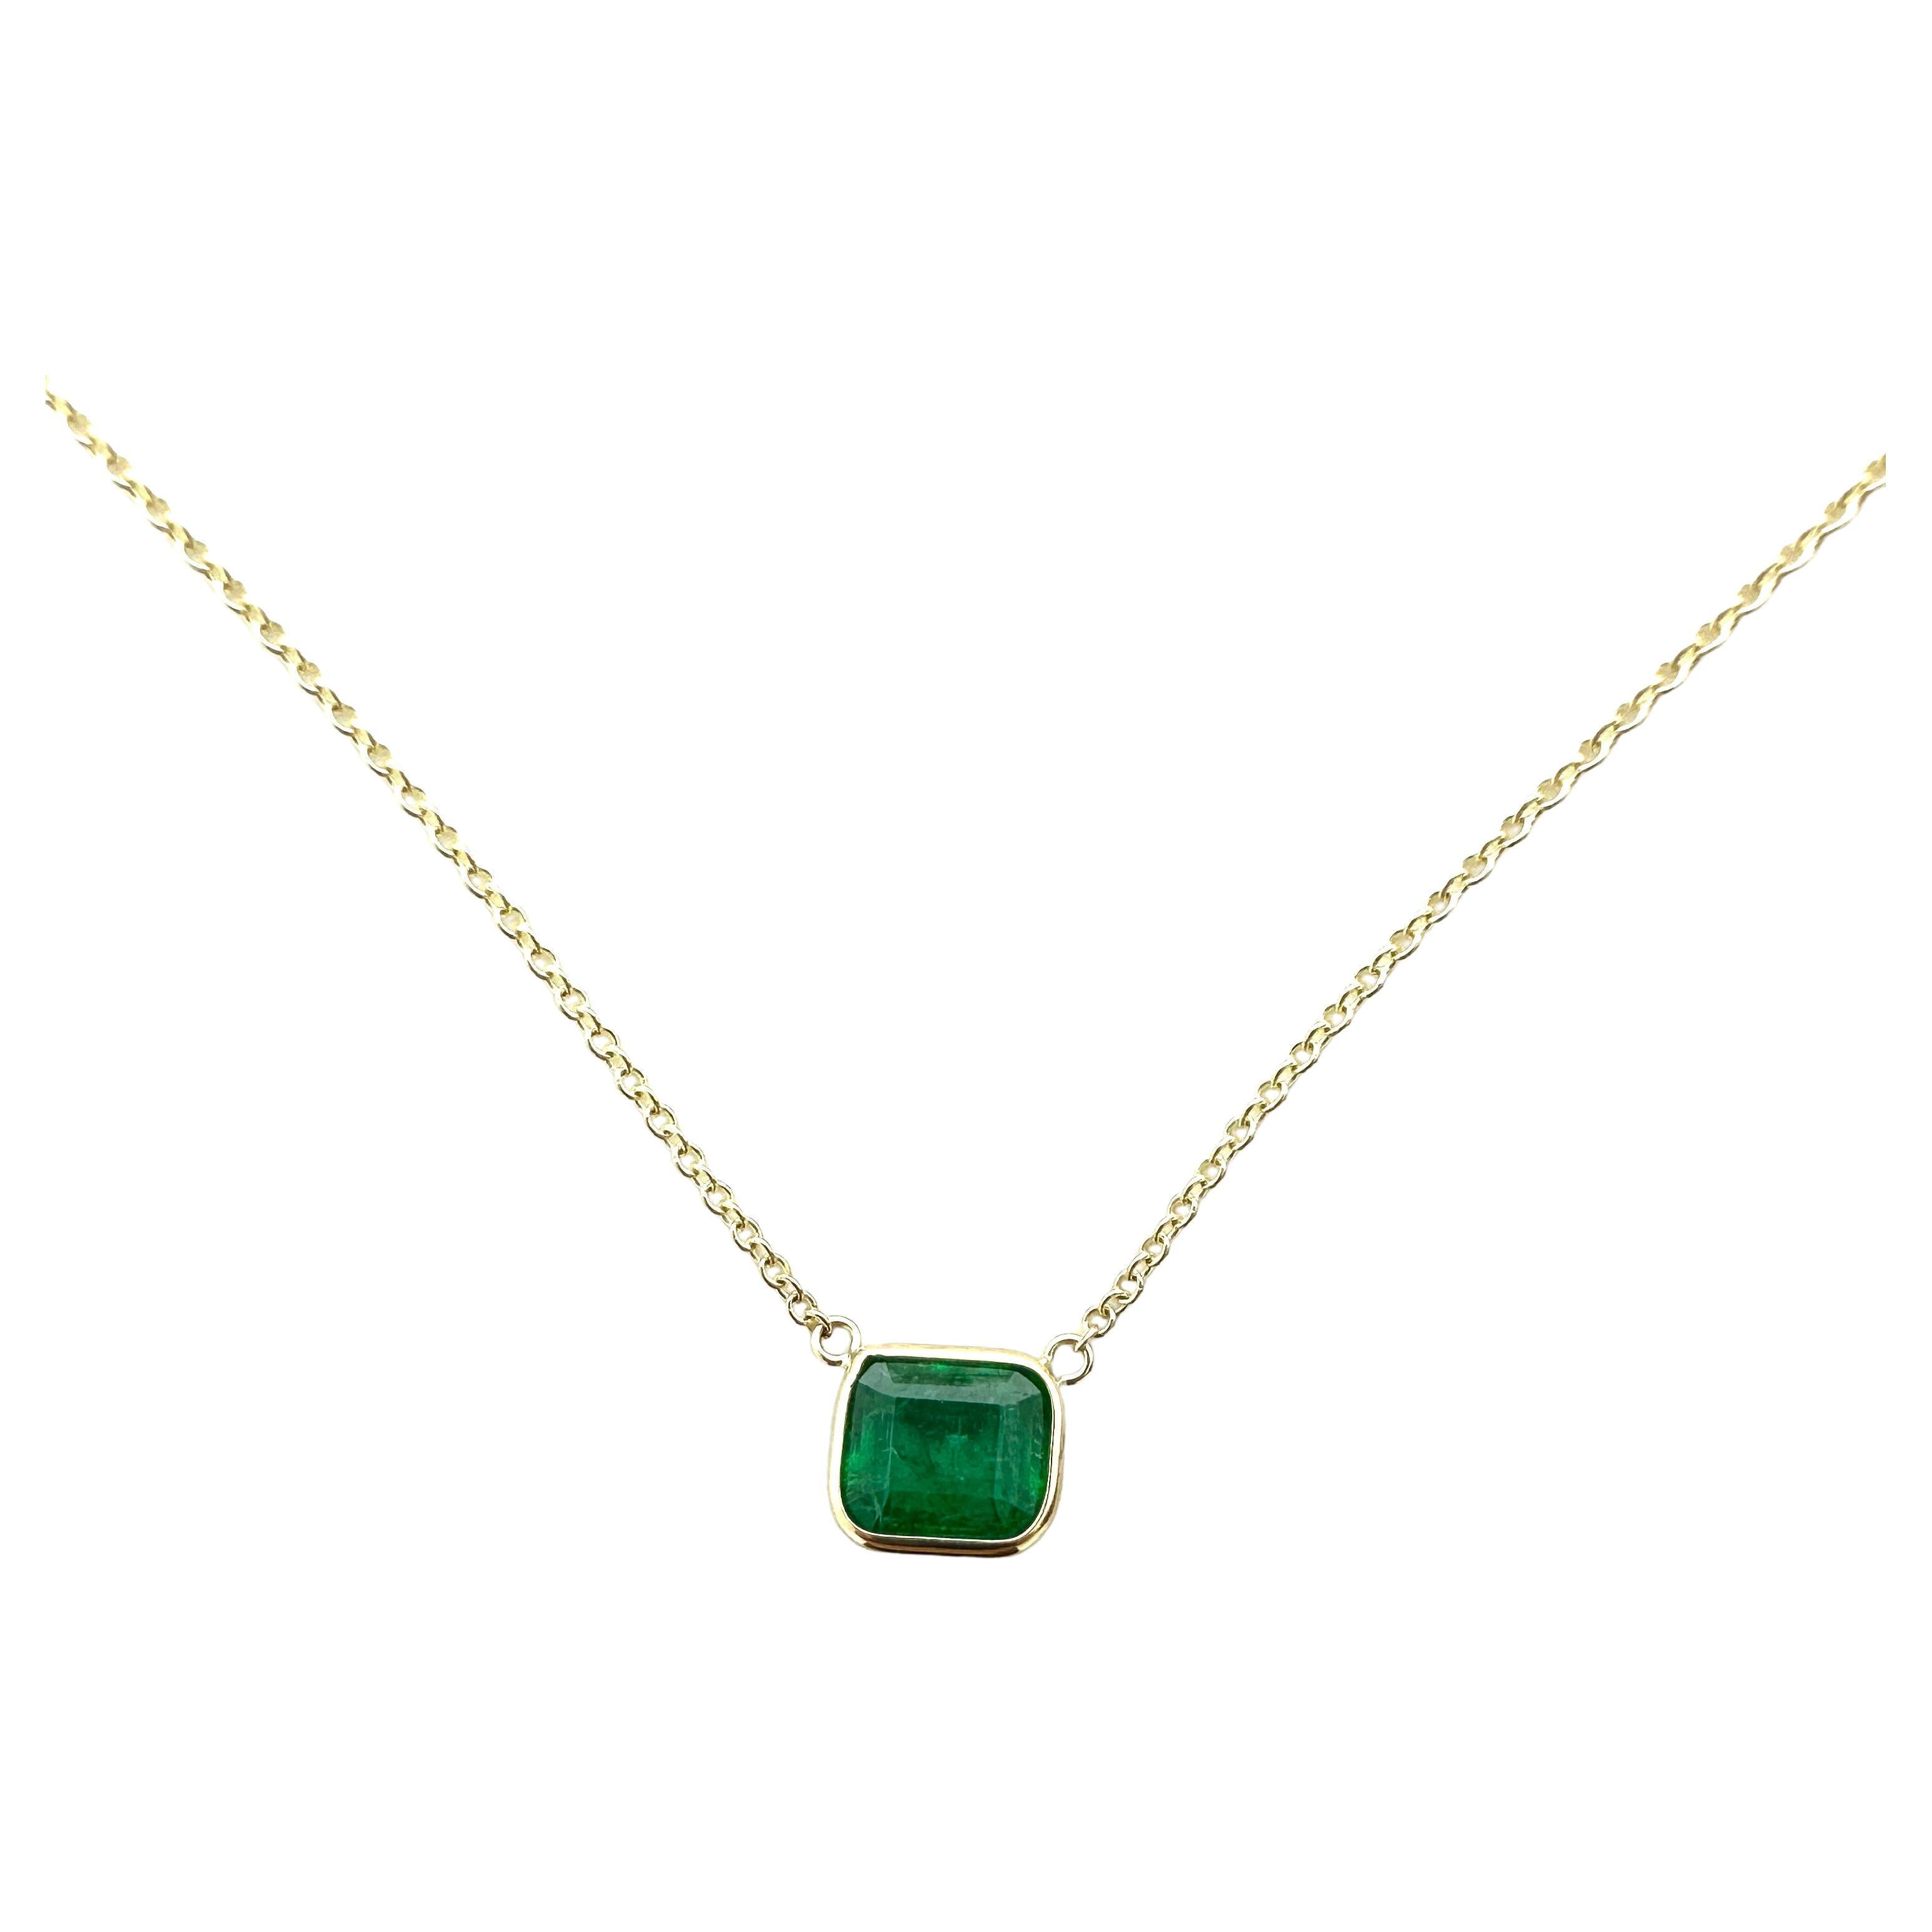 1.88 Carat Emerald Cut & Fashion Necklaces In 14K Yellow Gold